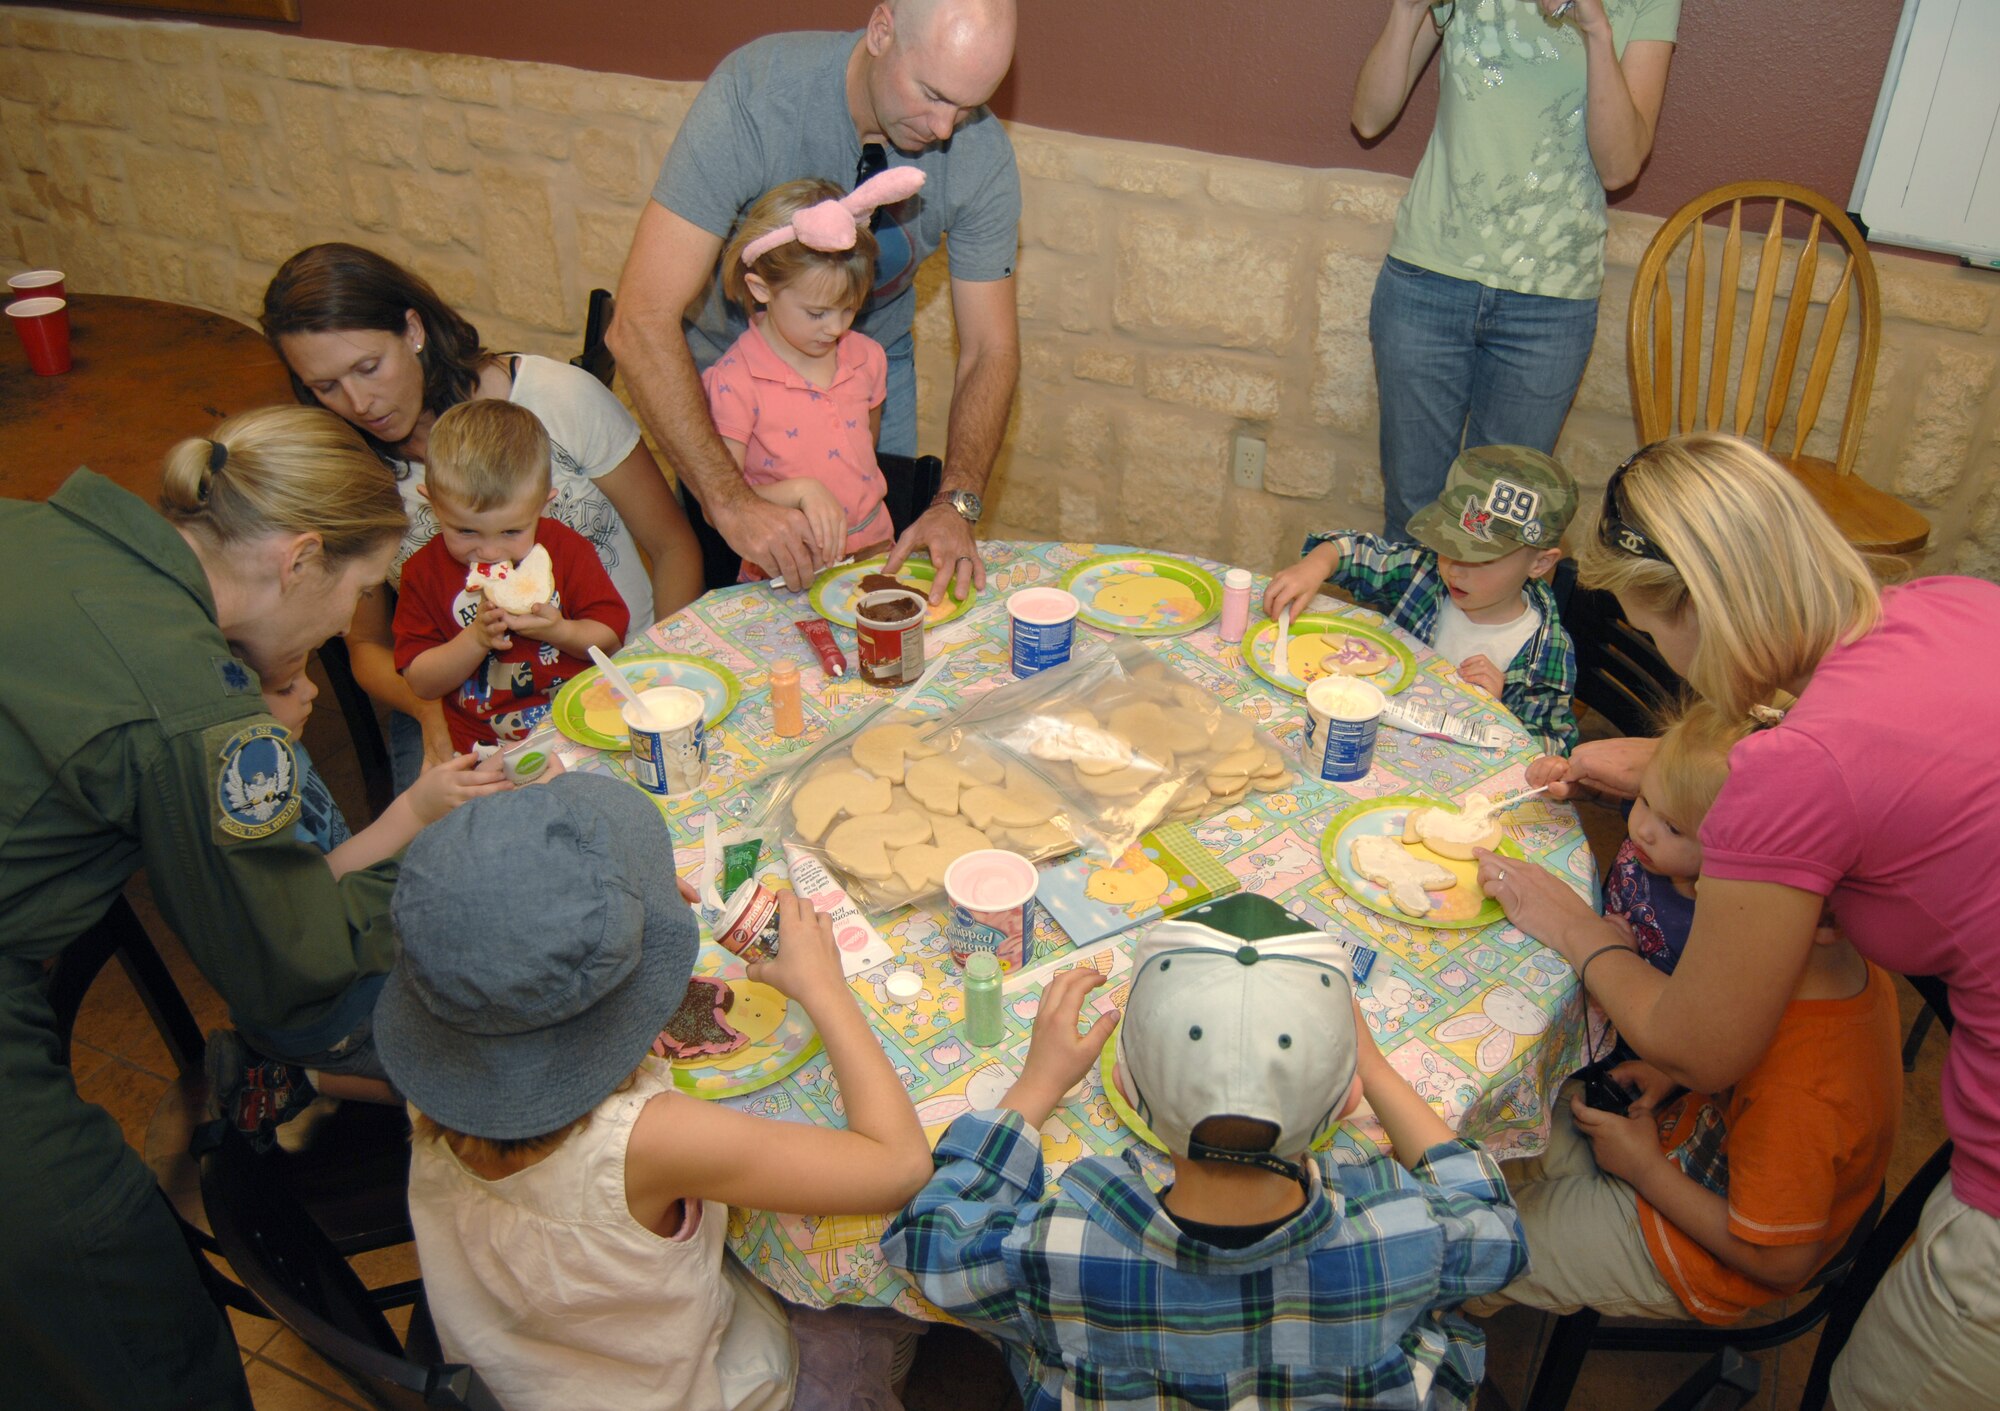 Members of the 358th Fighter Squadron and their children decorate cookies before participating in an Easter egg hunt at Davis-Monthan Air Force Base, Ariz., April 6. More than 60 eggs were hidden for the kids to find. (U.S. Air Force photo by Airman 1st Class Michael Washburn/Released)